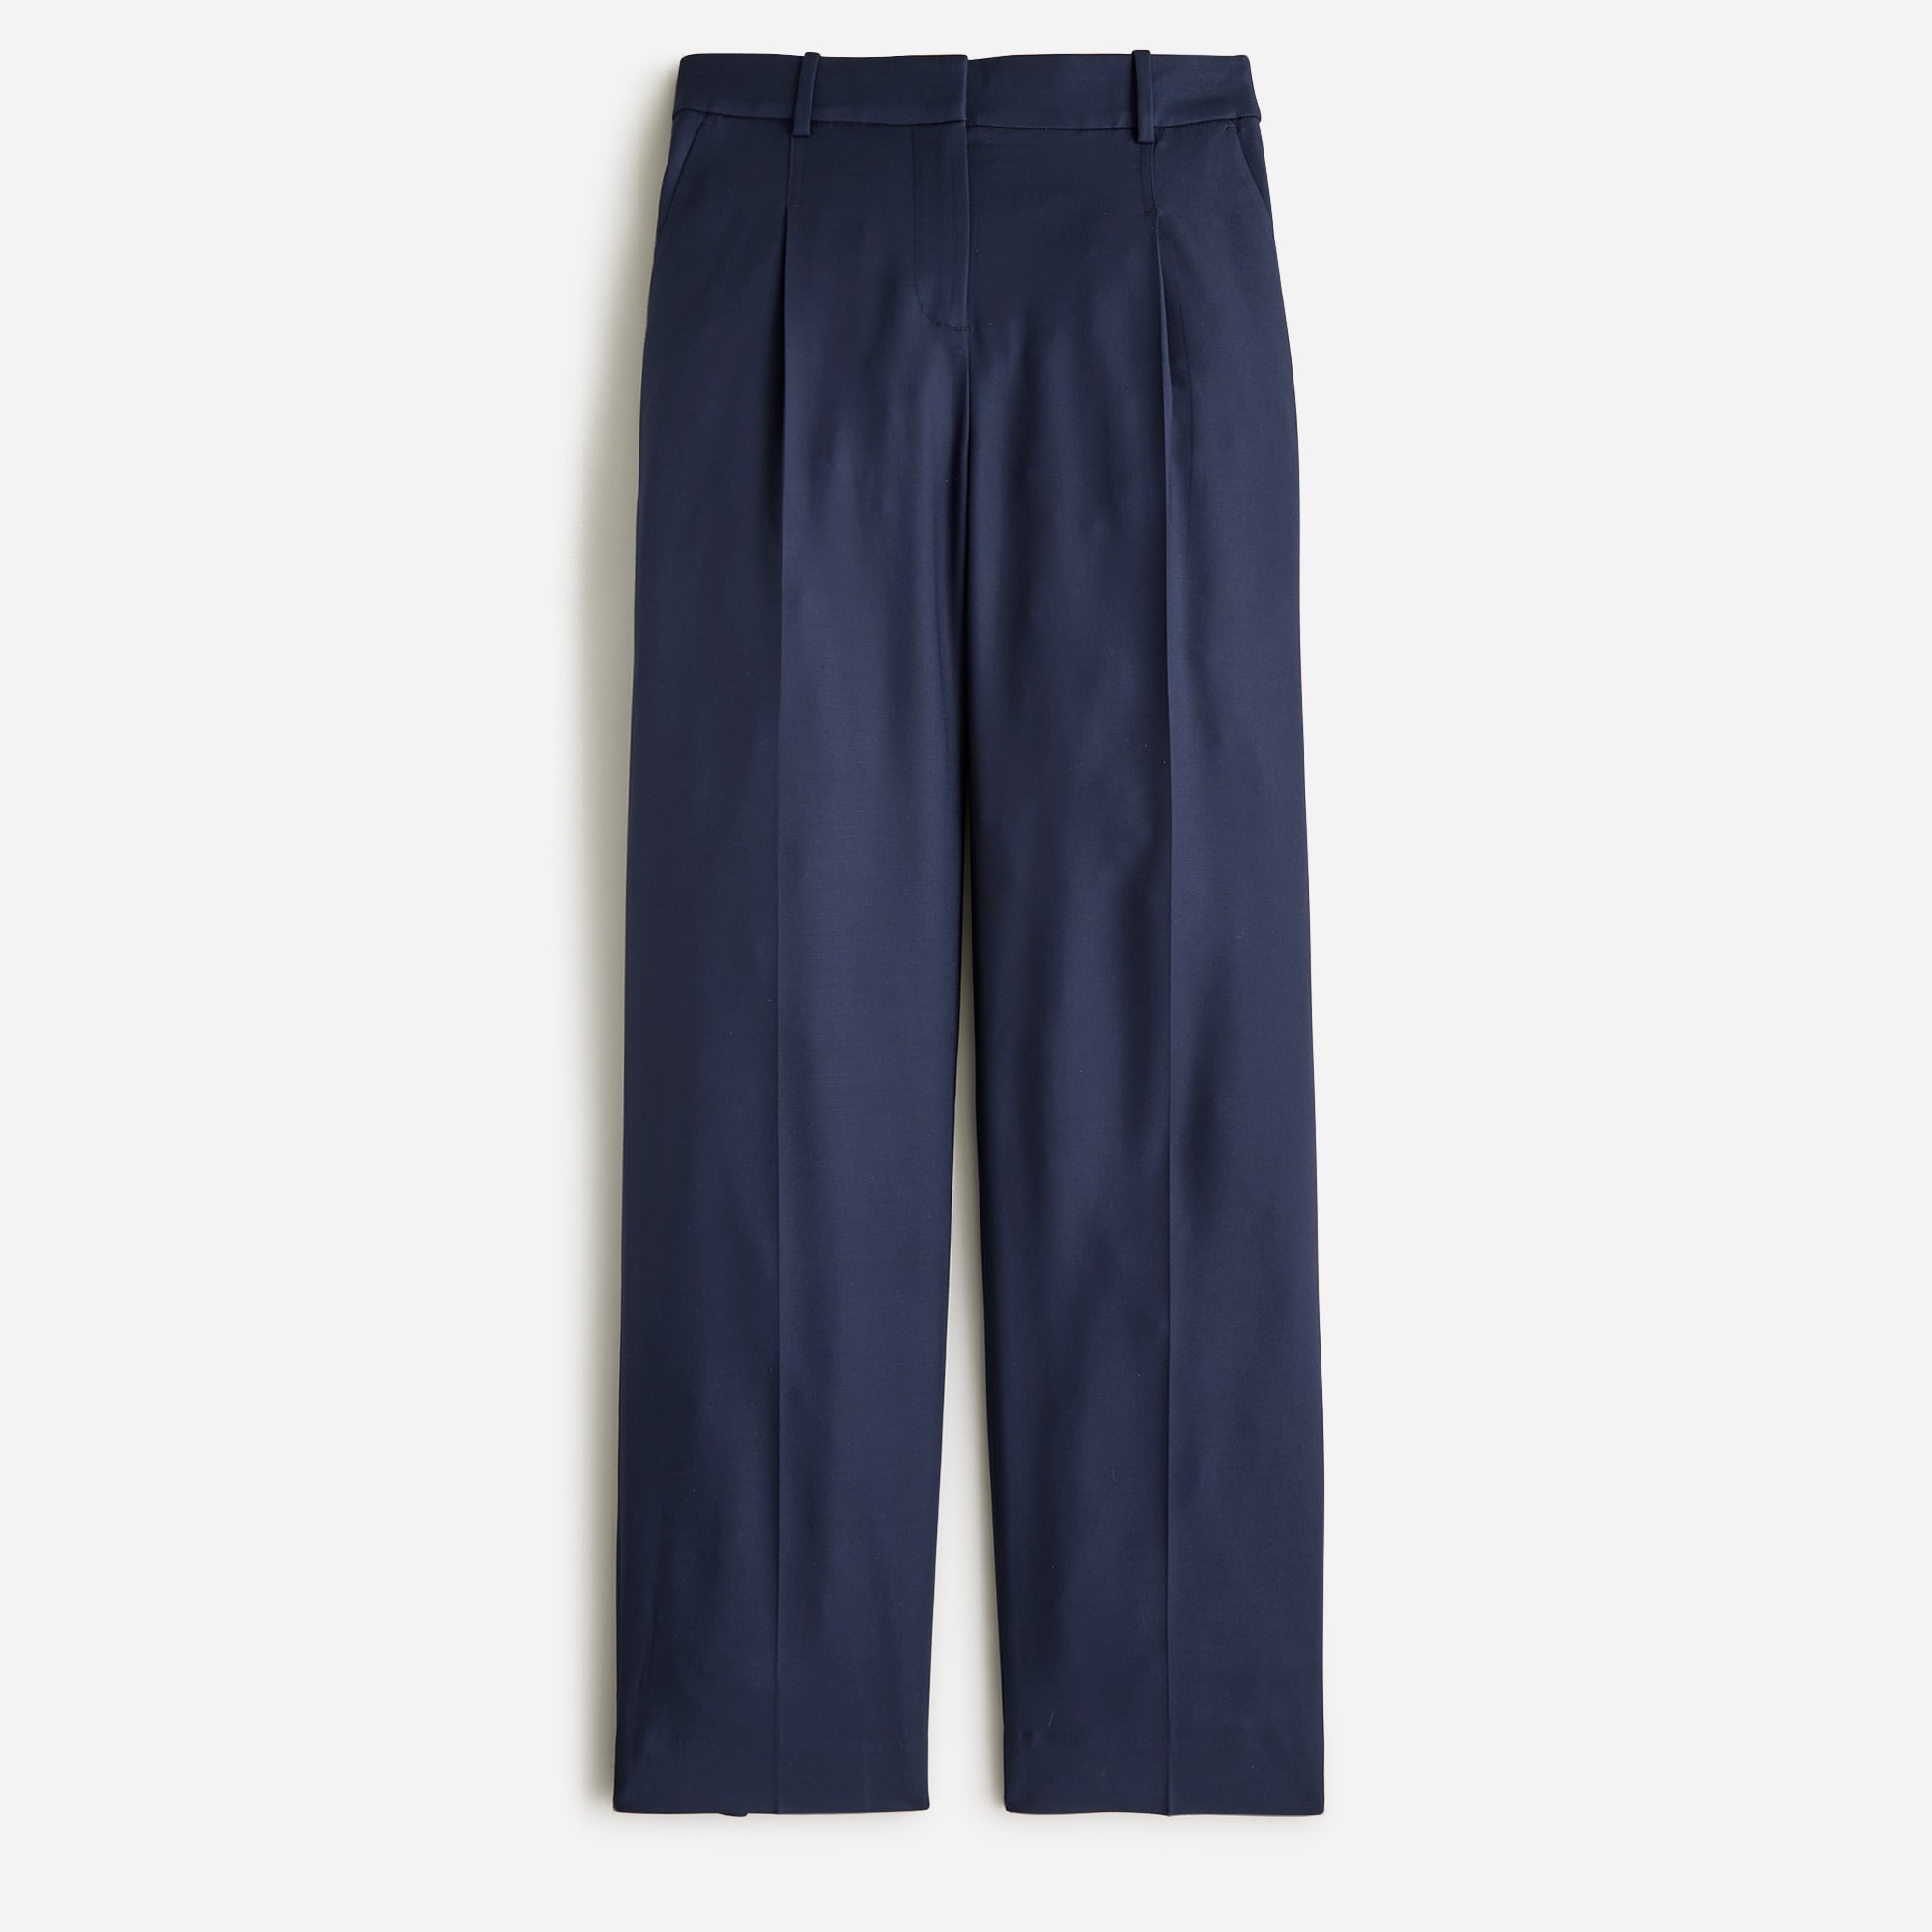  Petite essential pant in city twill